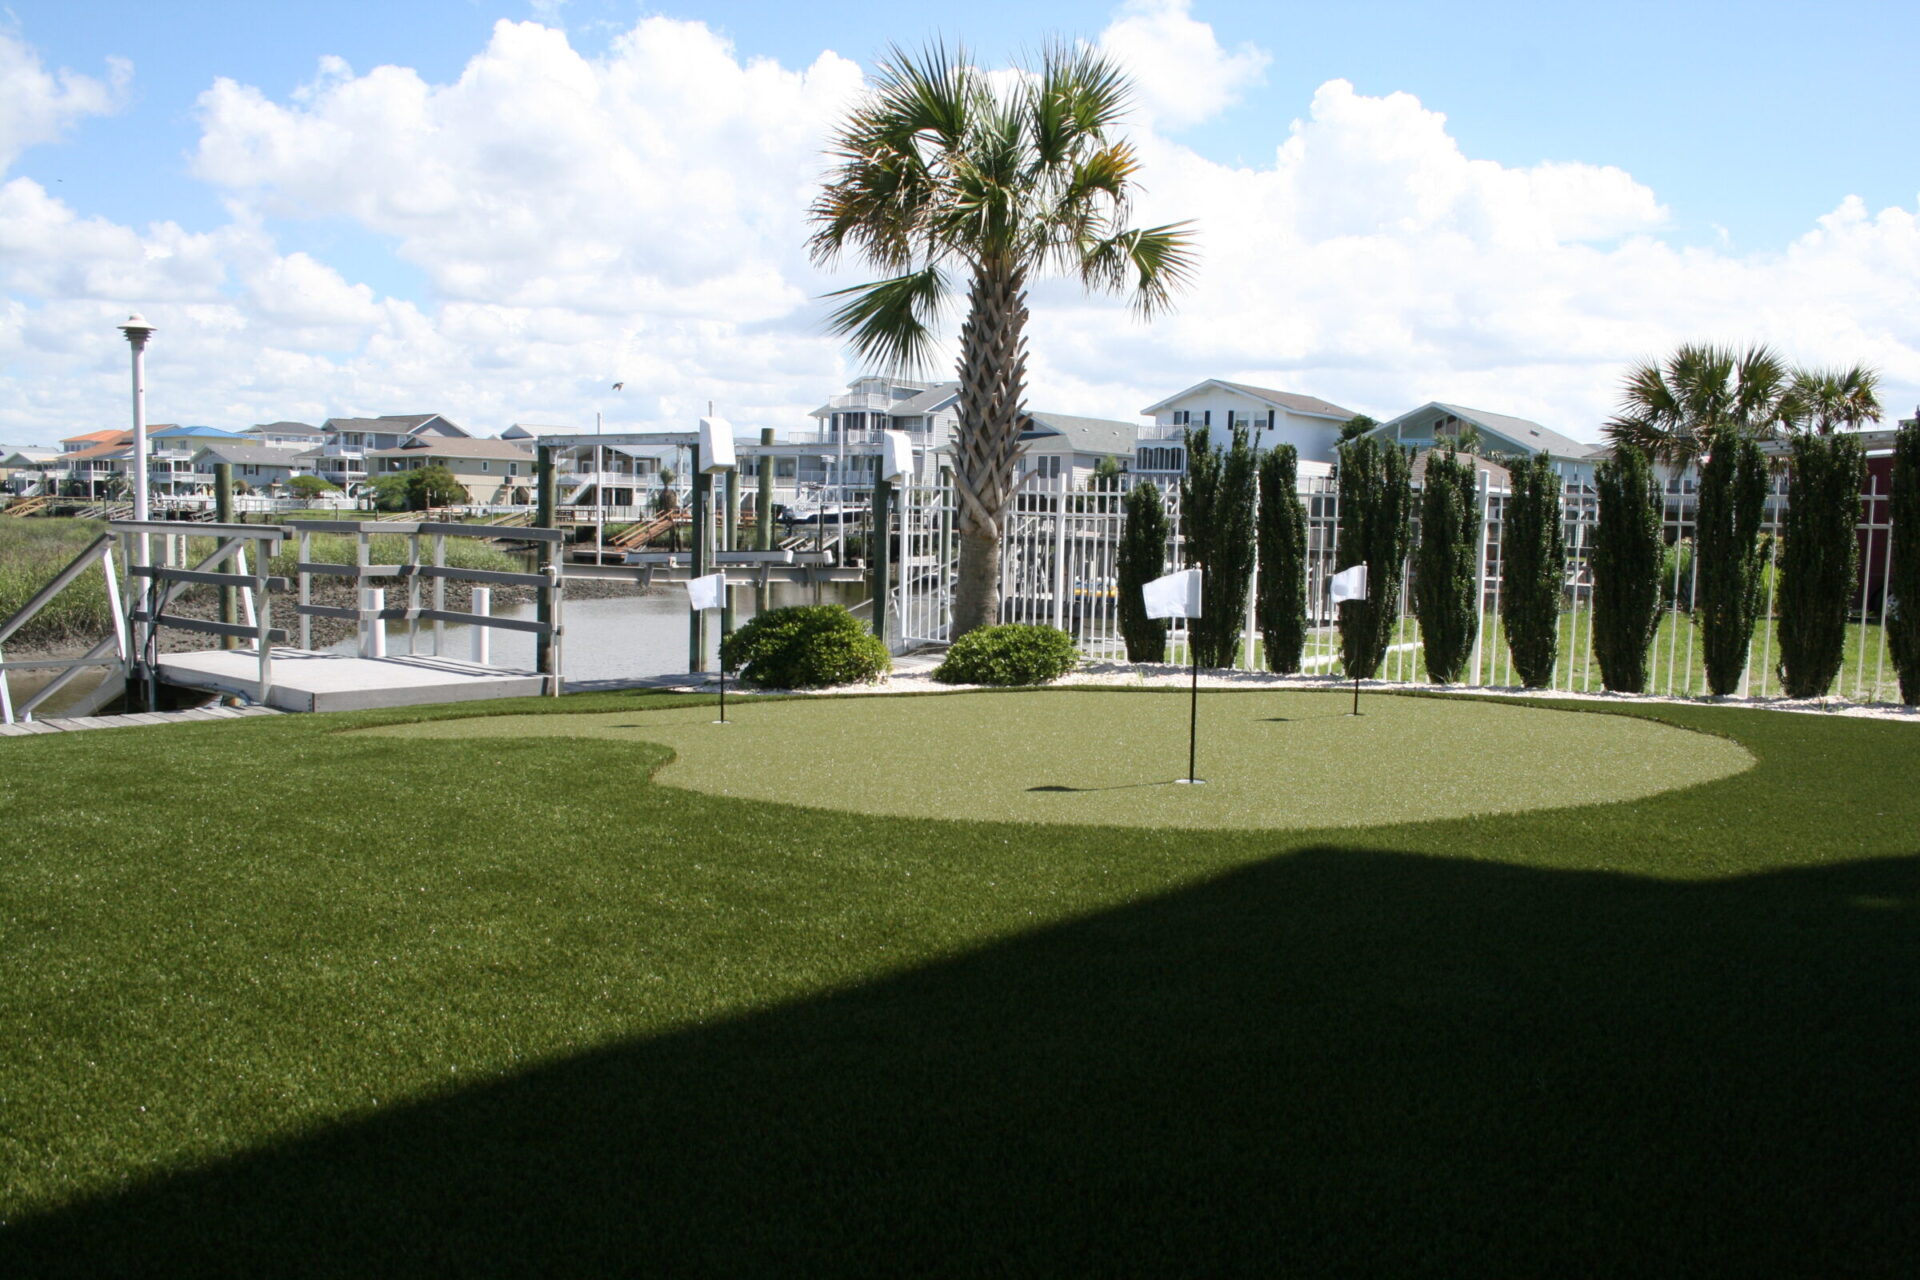 An outdoor mini-golf course with artificial green turf, several holes with flags, a palm tree, and residential buildings by a waterway under a blue sky.